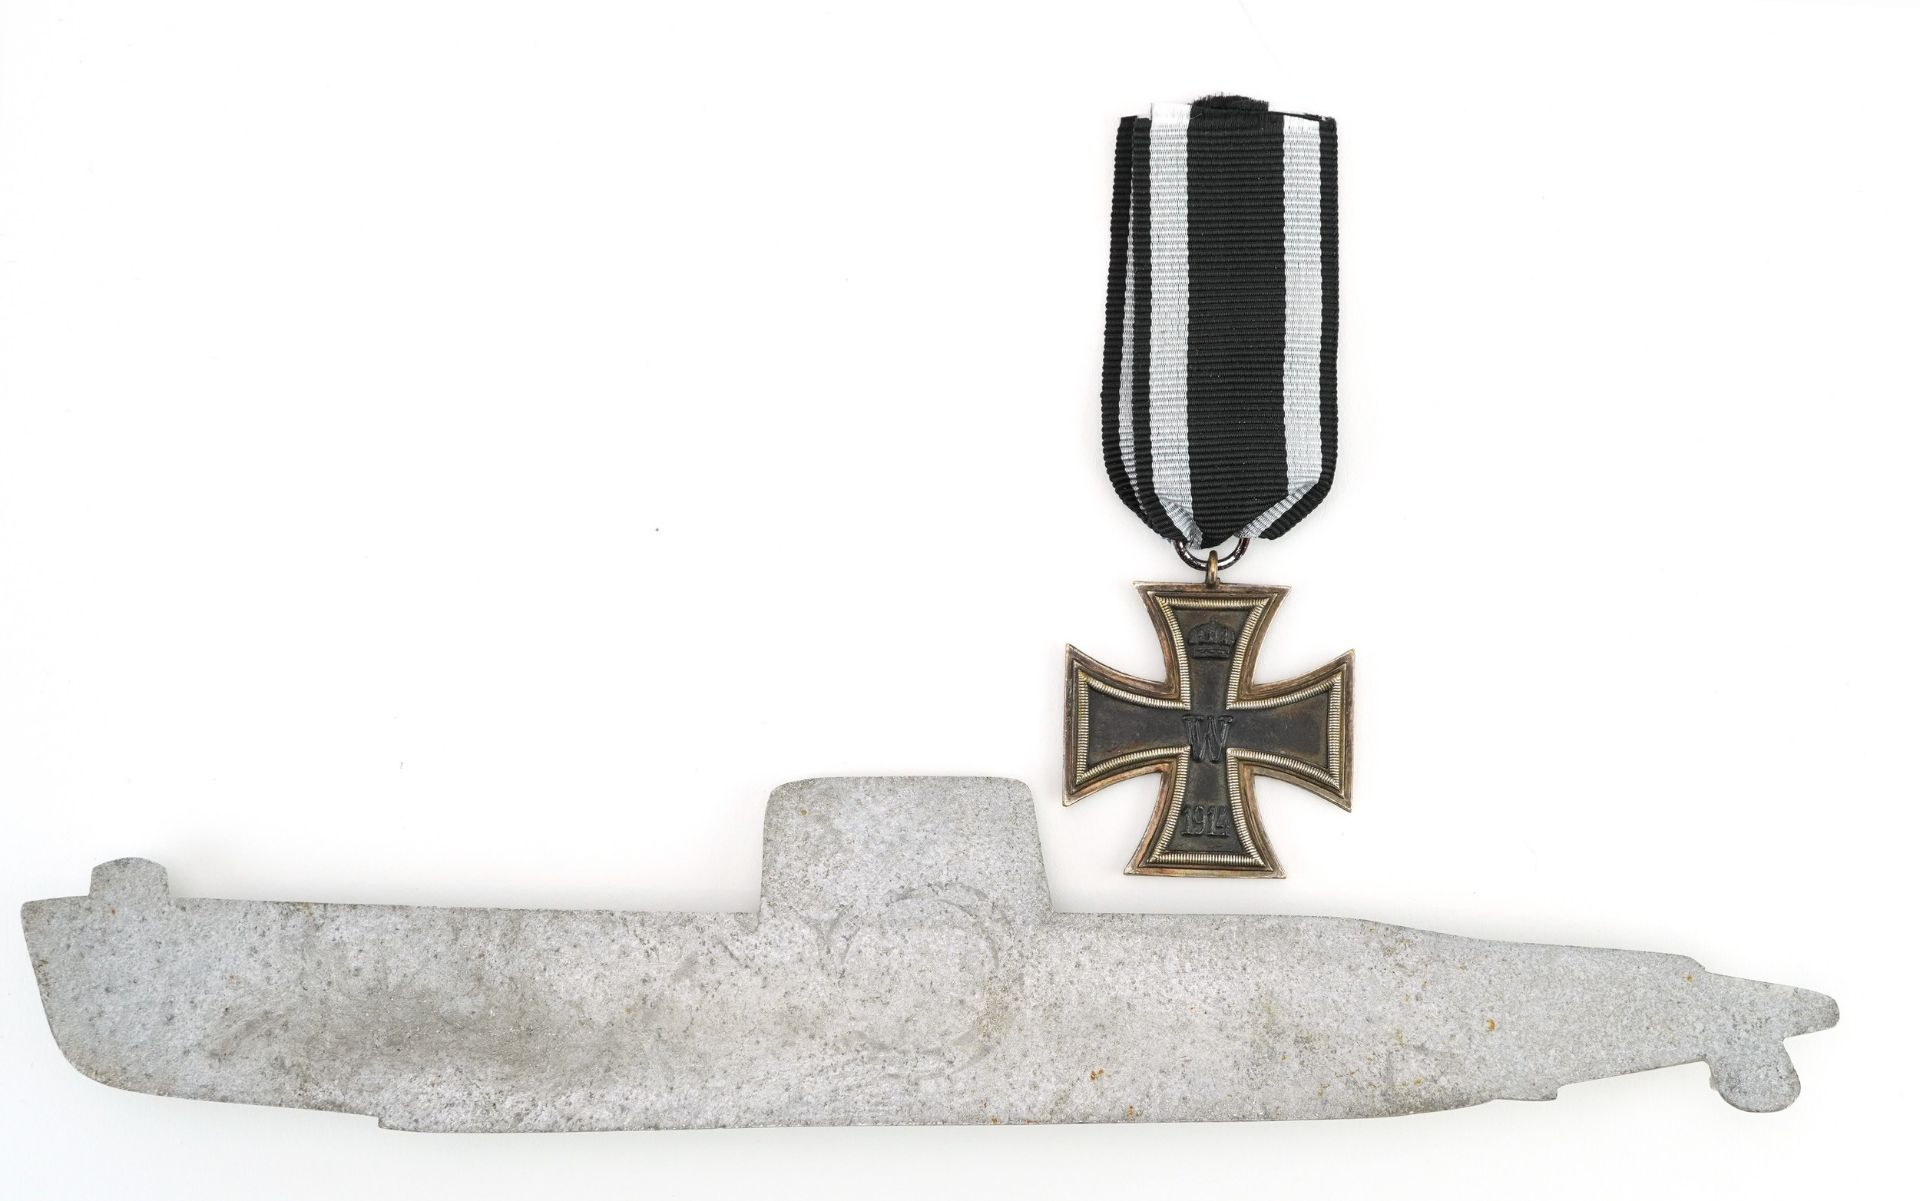 German military interest Iron Cross and a U-boat plaque - Image 2 of 2